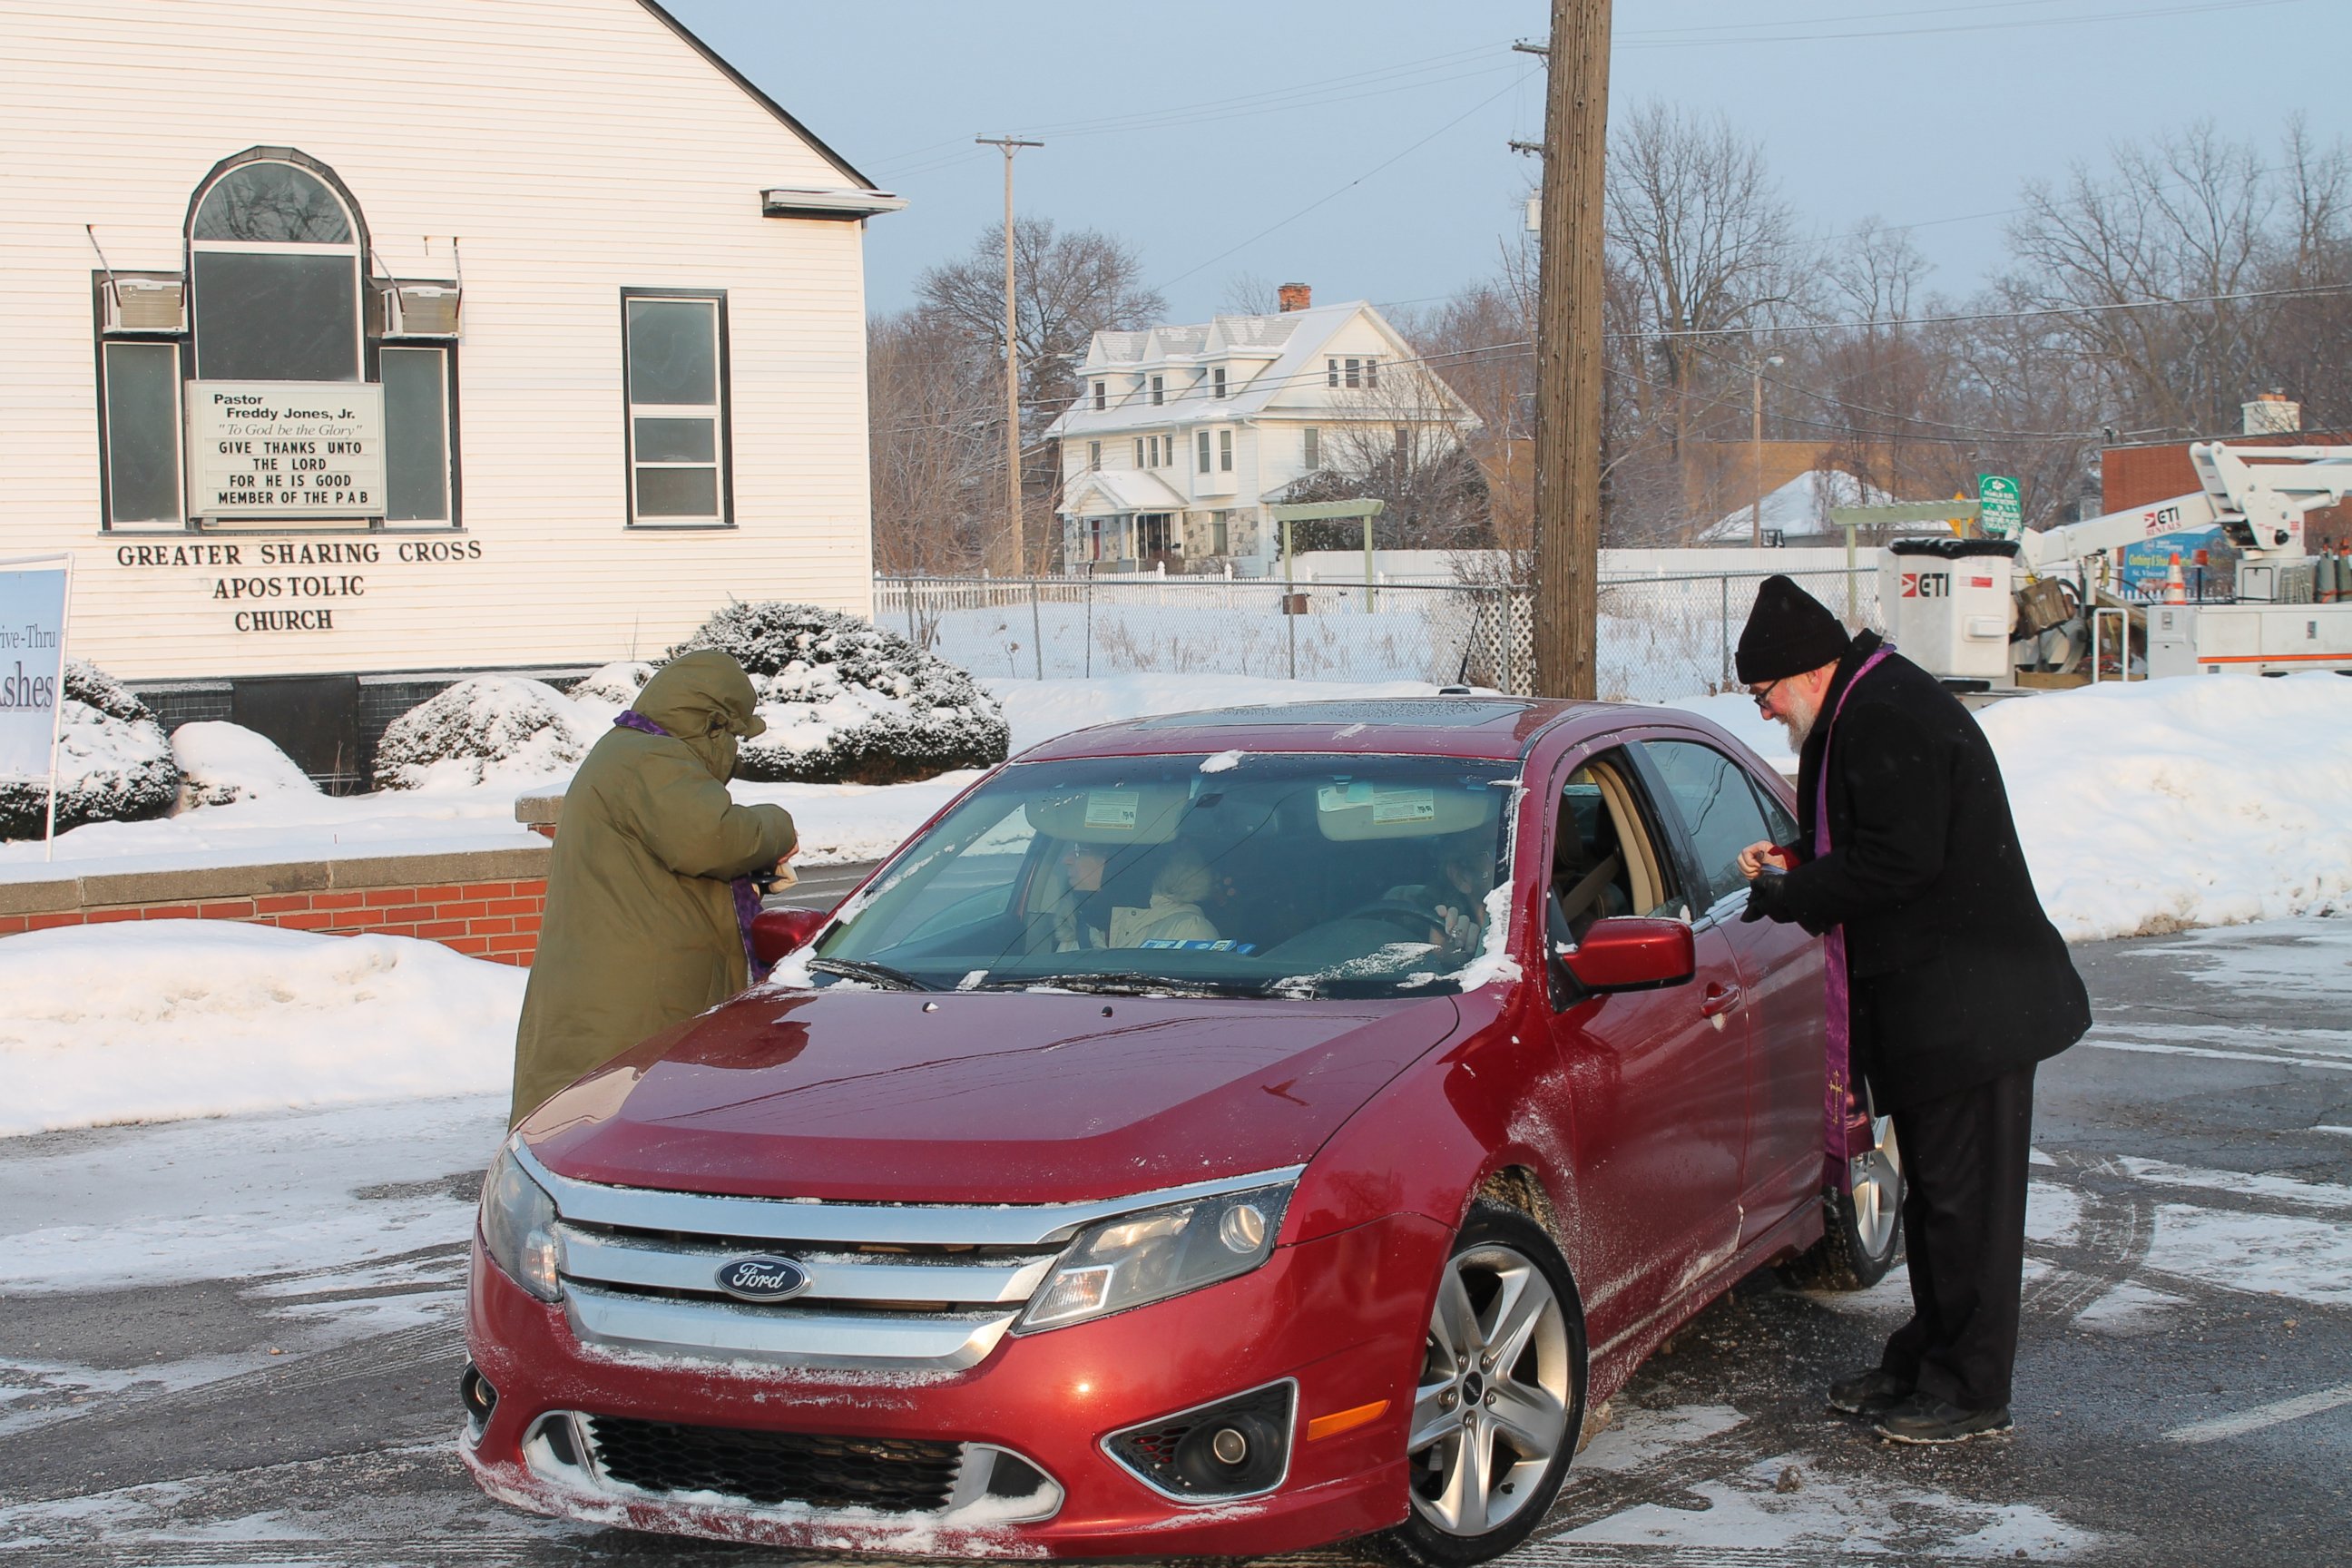 PHOTO: All Saint's Episcopal Church in Pontiac, Michigan, offered a “Drive –Thru” Ash Wednesday service, Feb. 18, 2015, from 7:30 to 8:30 a.m.
